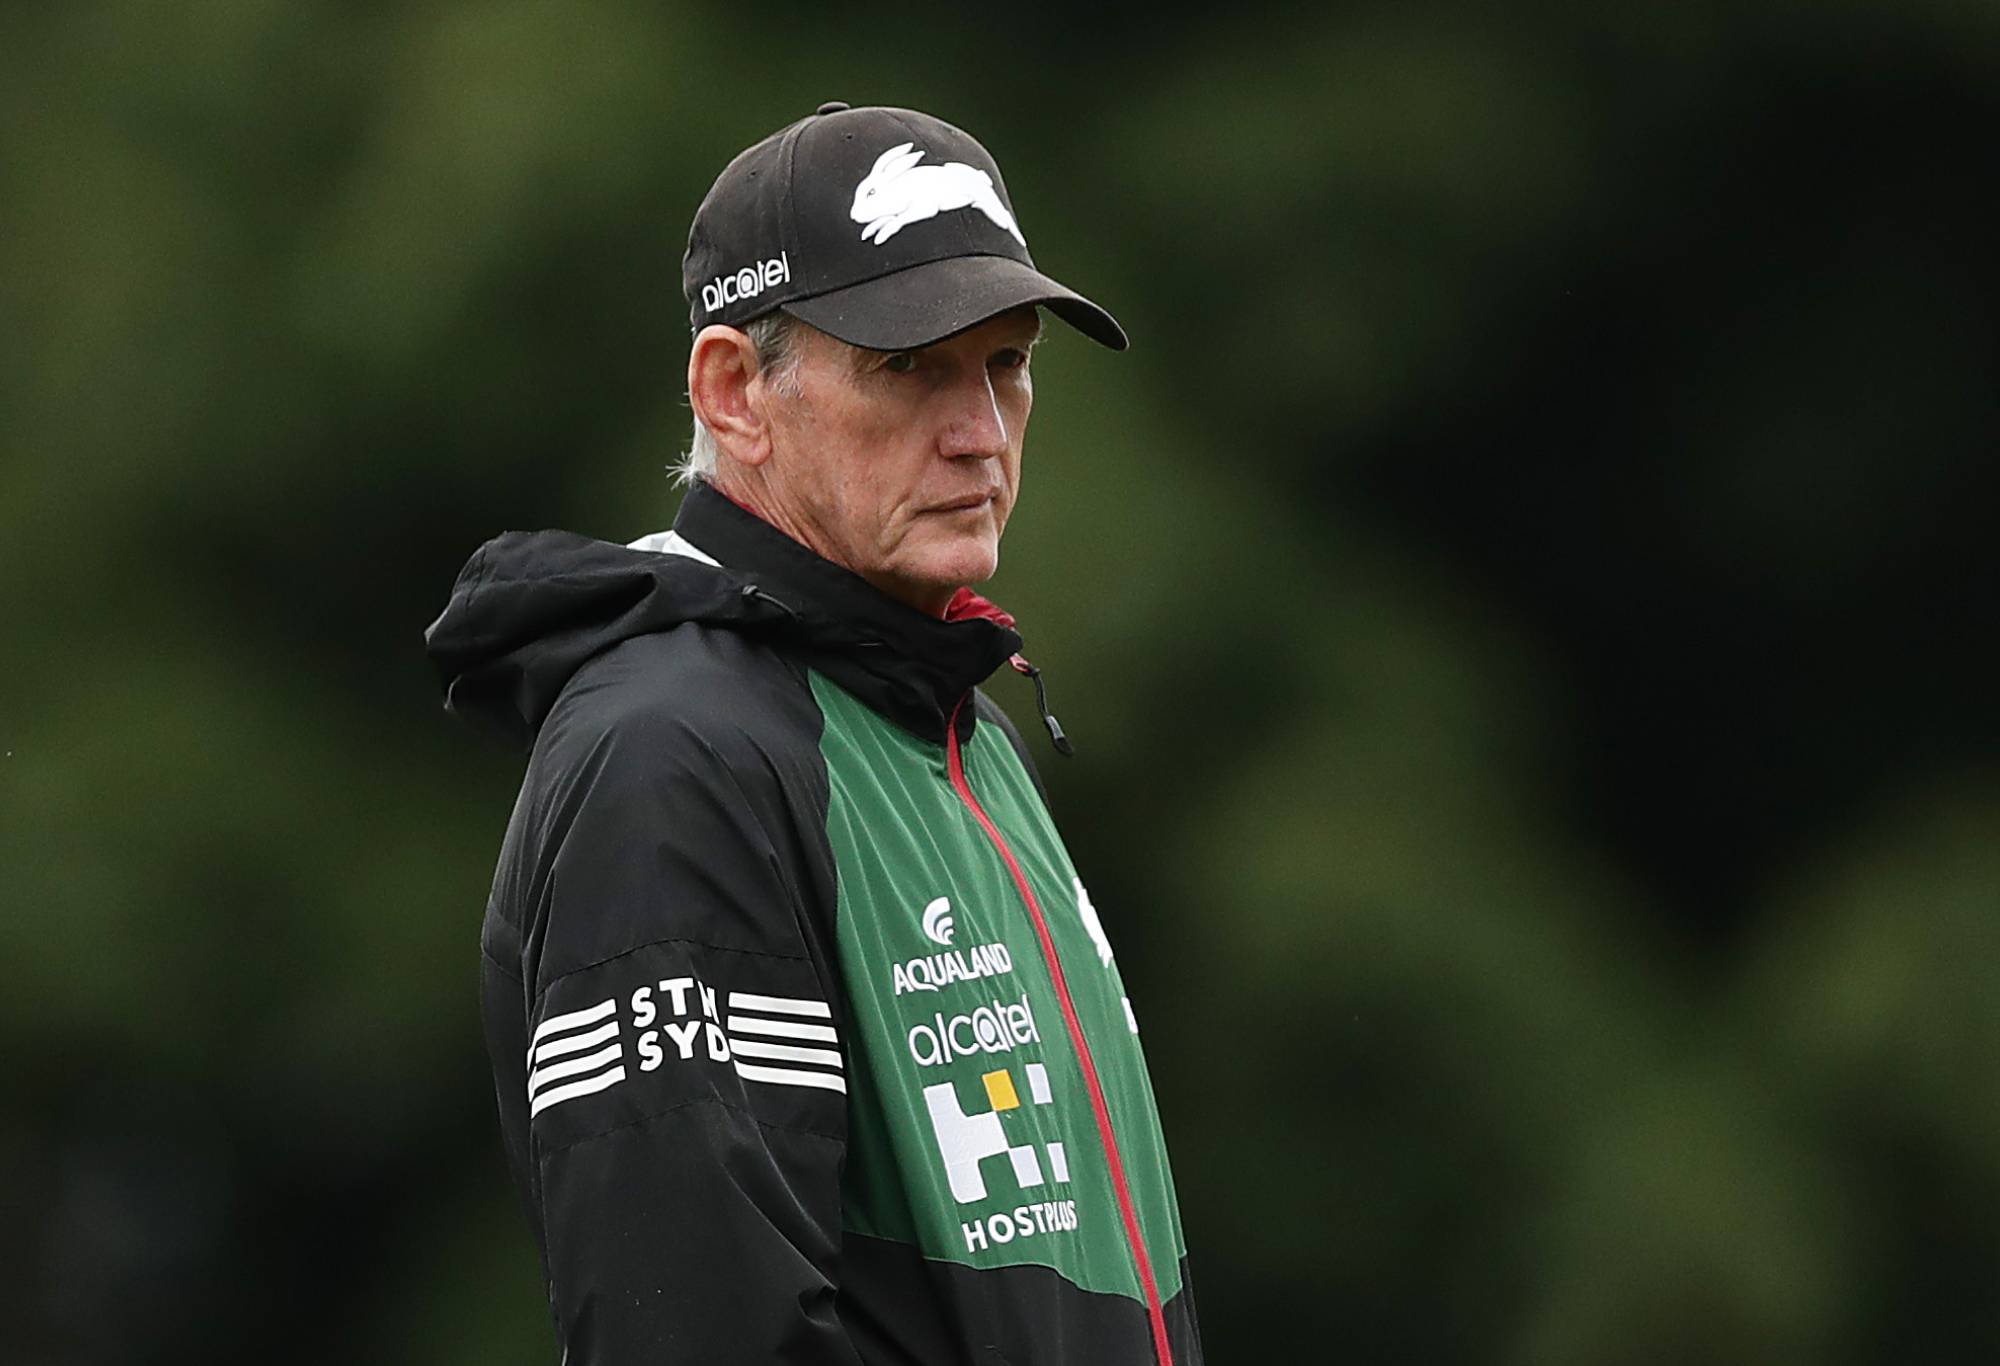 SYDNEY, AUSTRALIA - MARCH 09: Rabbitohs head coach Wayne Bennett looks on during a South Sydney Rabbitohs NRL training session at Redfern Oval on March 09, 2020 in Sydney, Australia. (Photo by Mark Metcalfe/Getty Images)